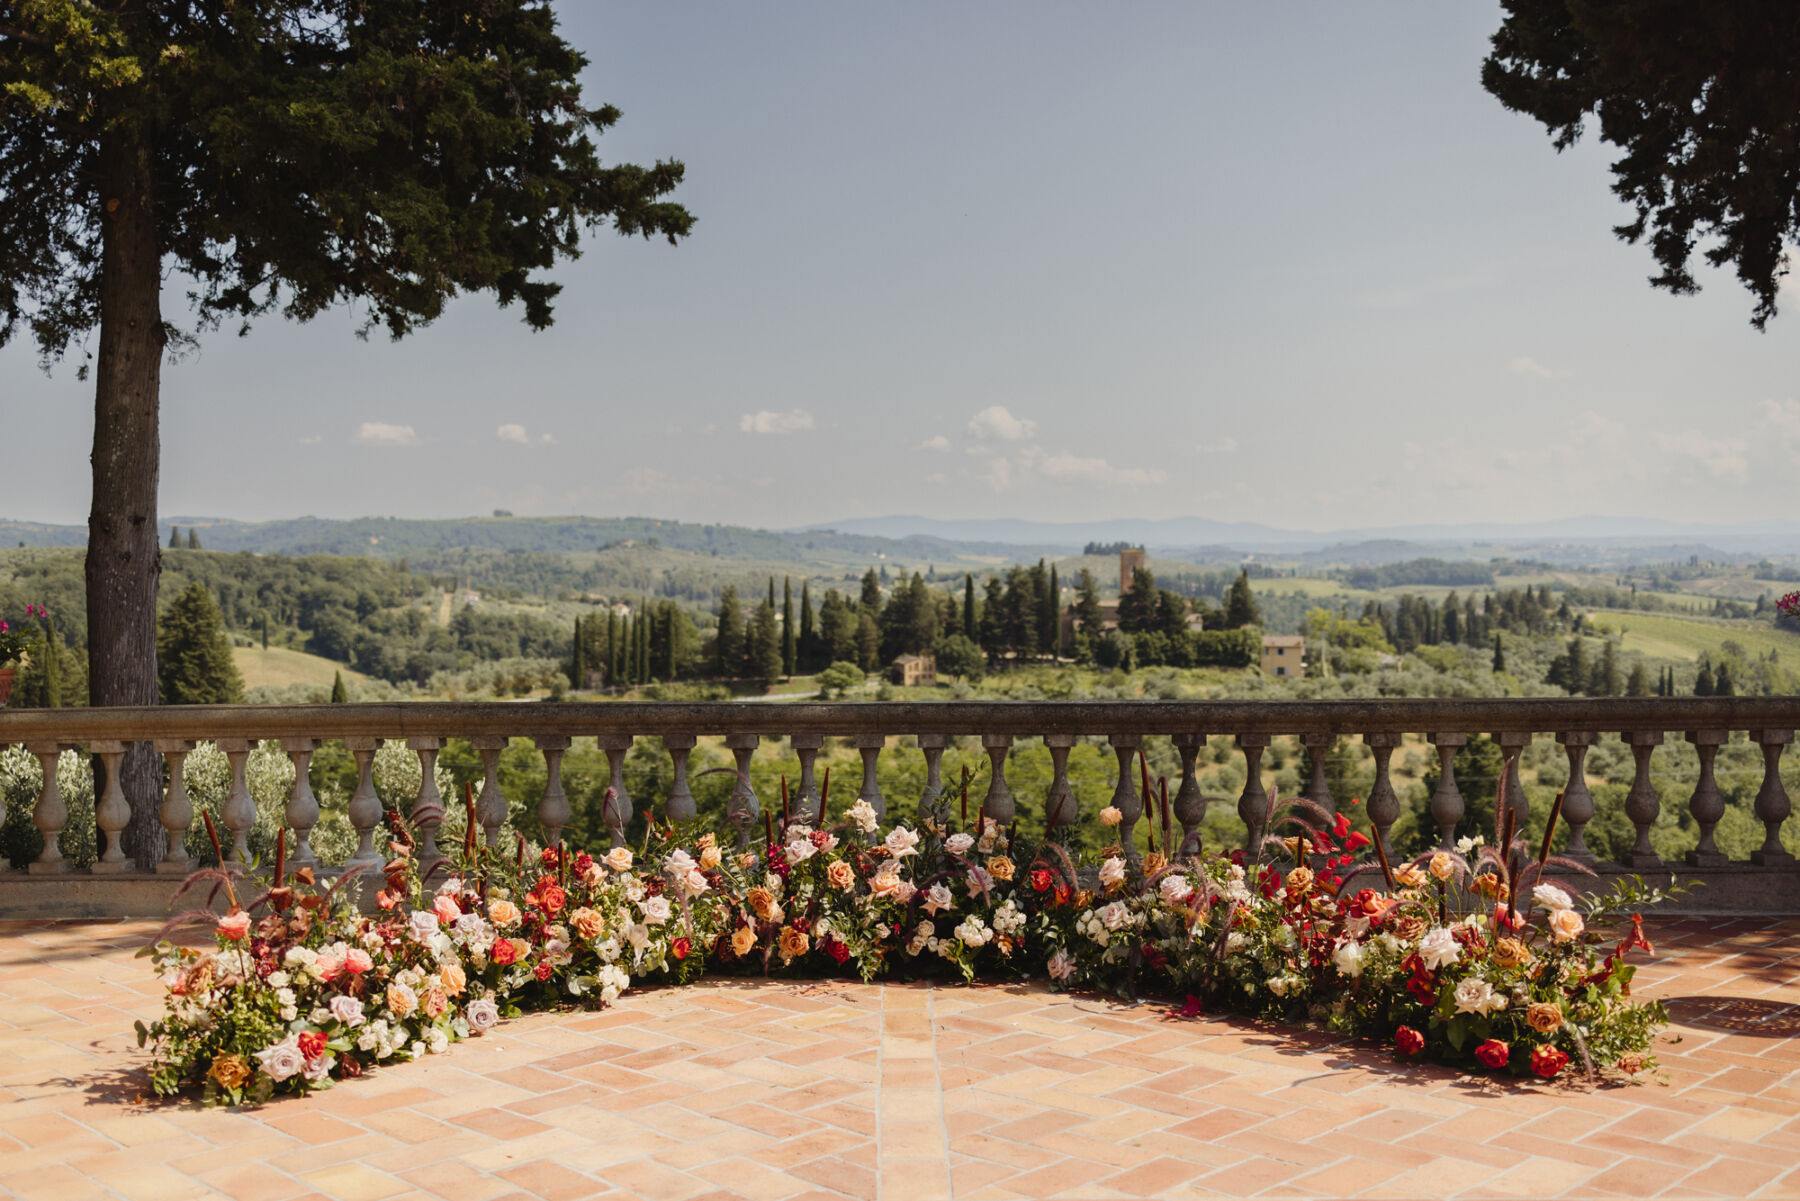 Curved flower installation on the ground, wedding ceremony backdrop. The flowers are for an Italian wedding and the scene features rolling hills of Tuscany in the backdrop.